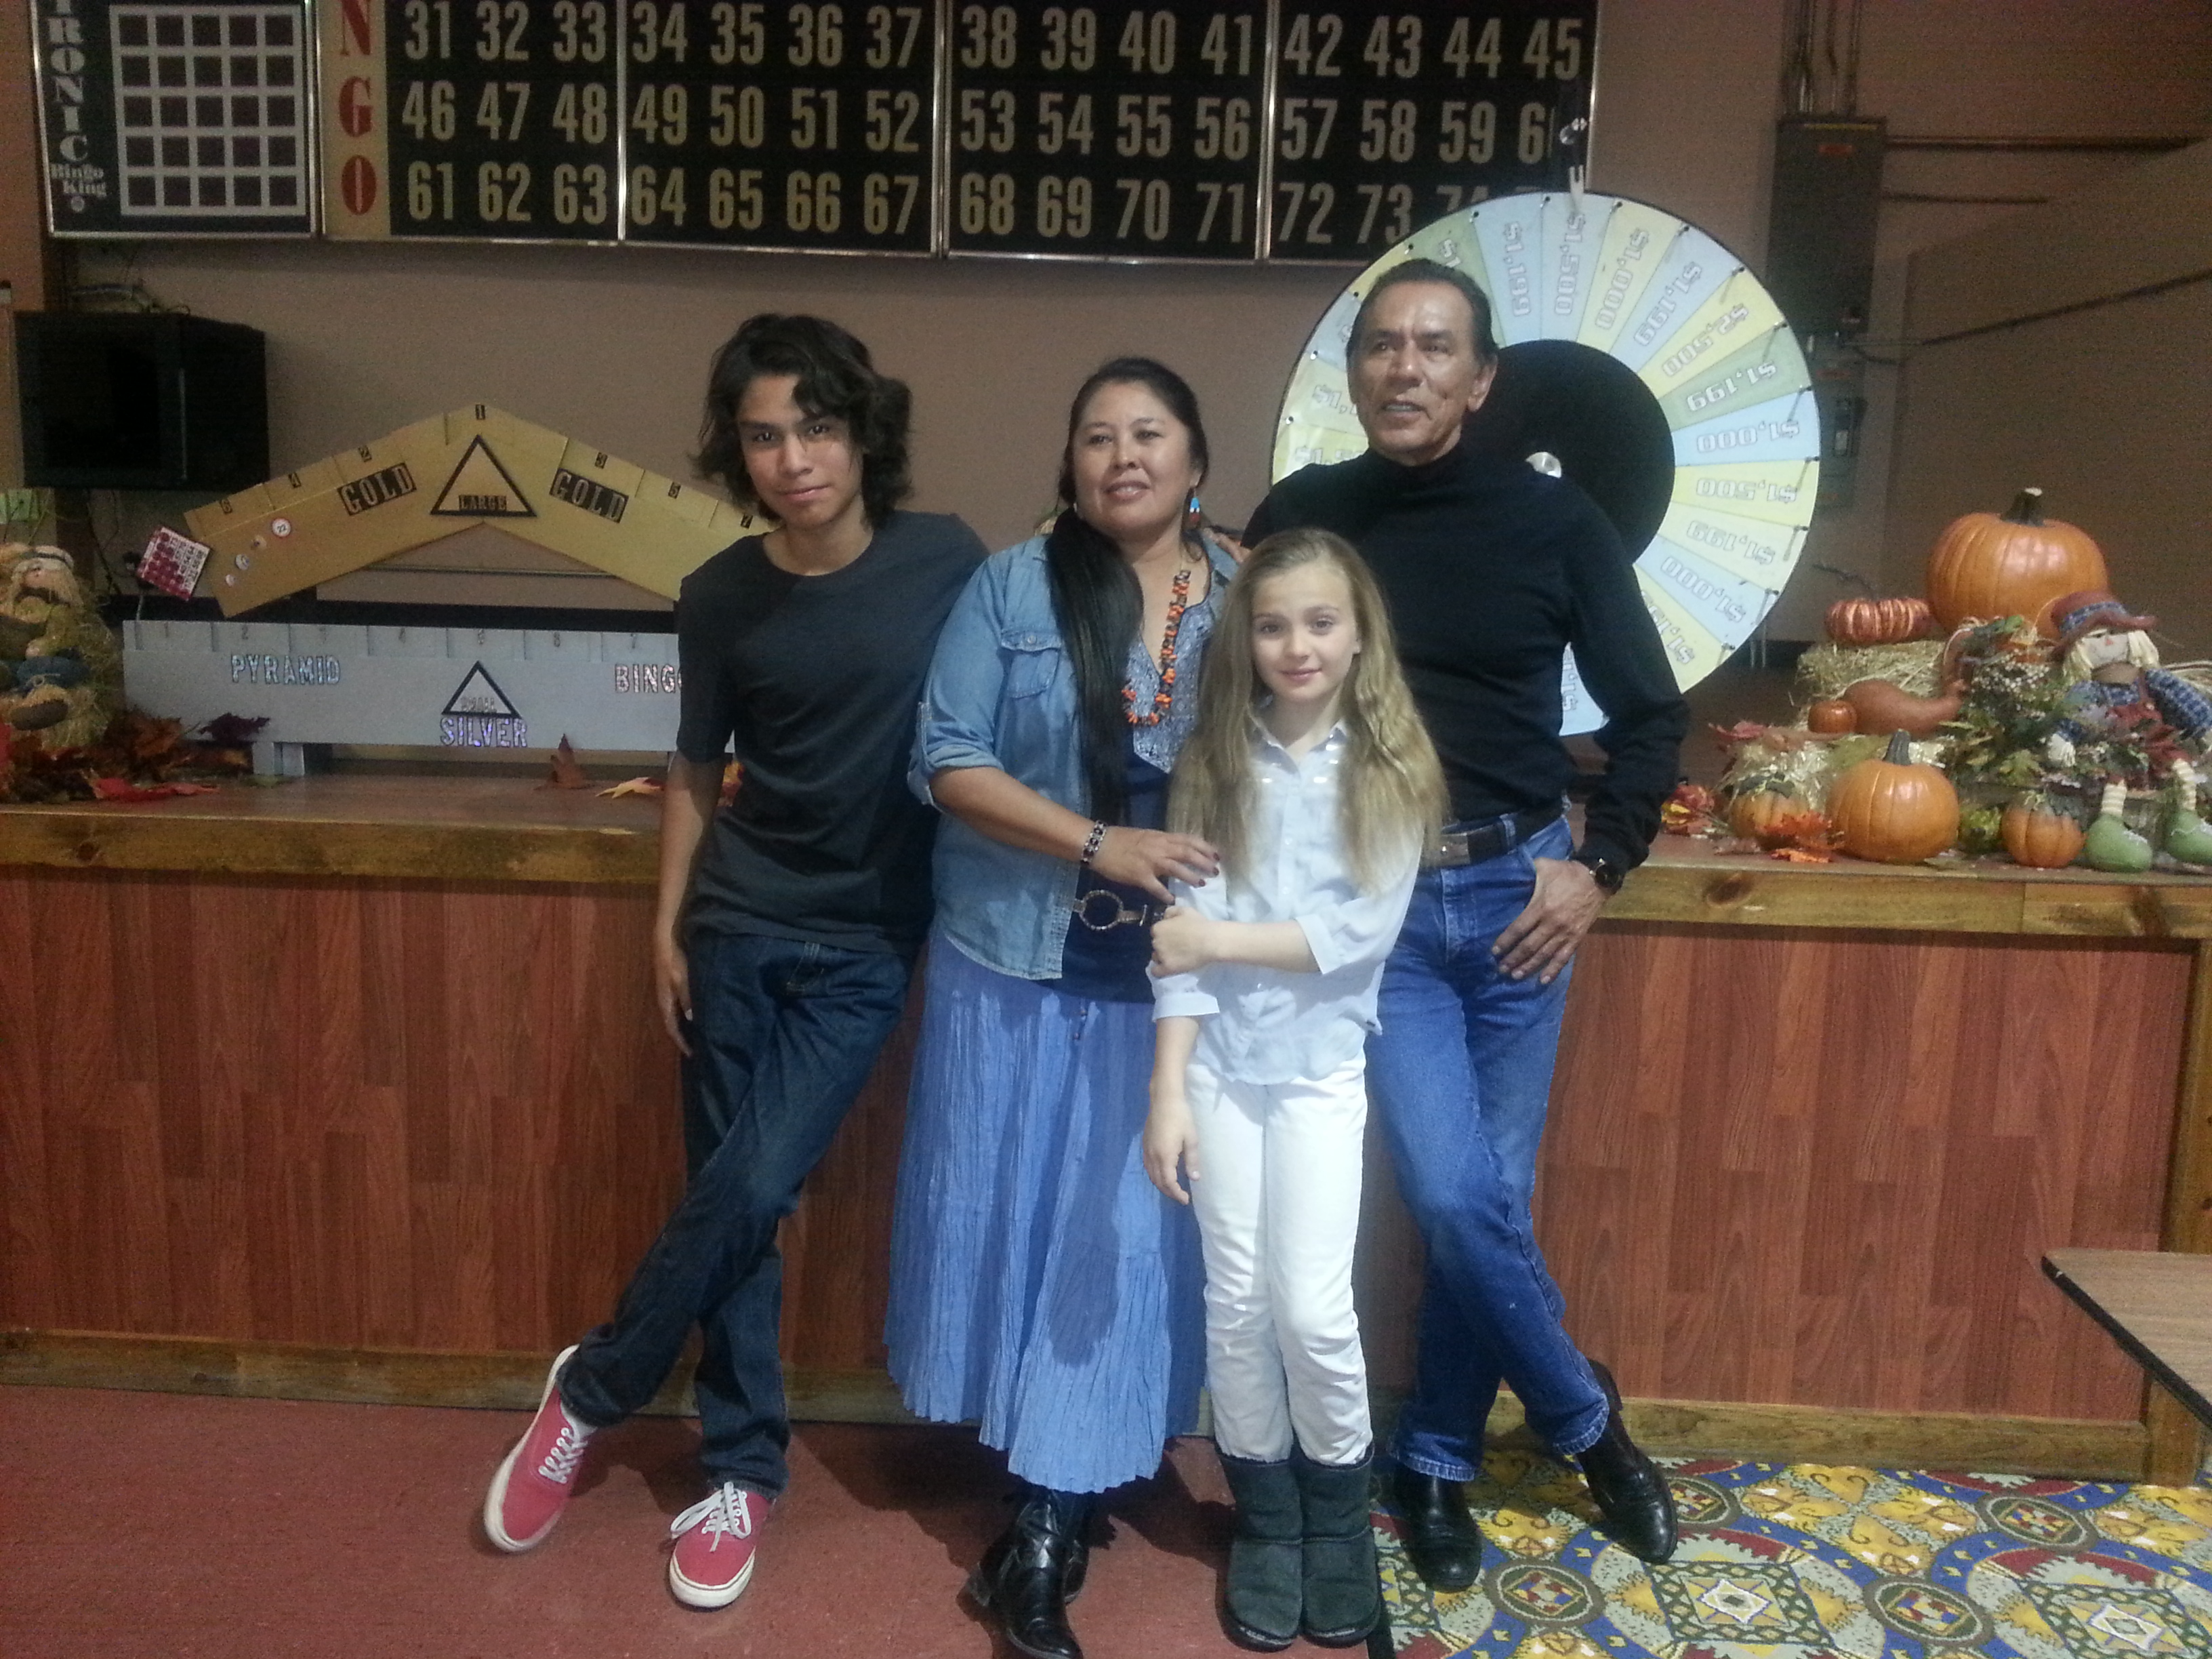 Chiara Aurelia filming Gaming with Wes Studi and Forrest Goodluck, 2013